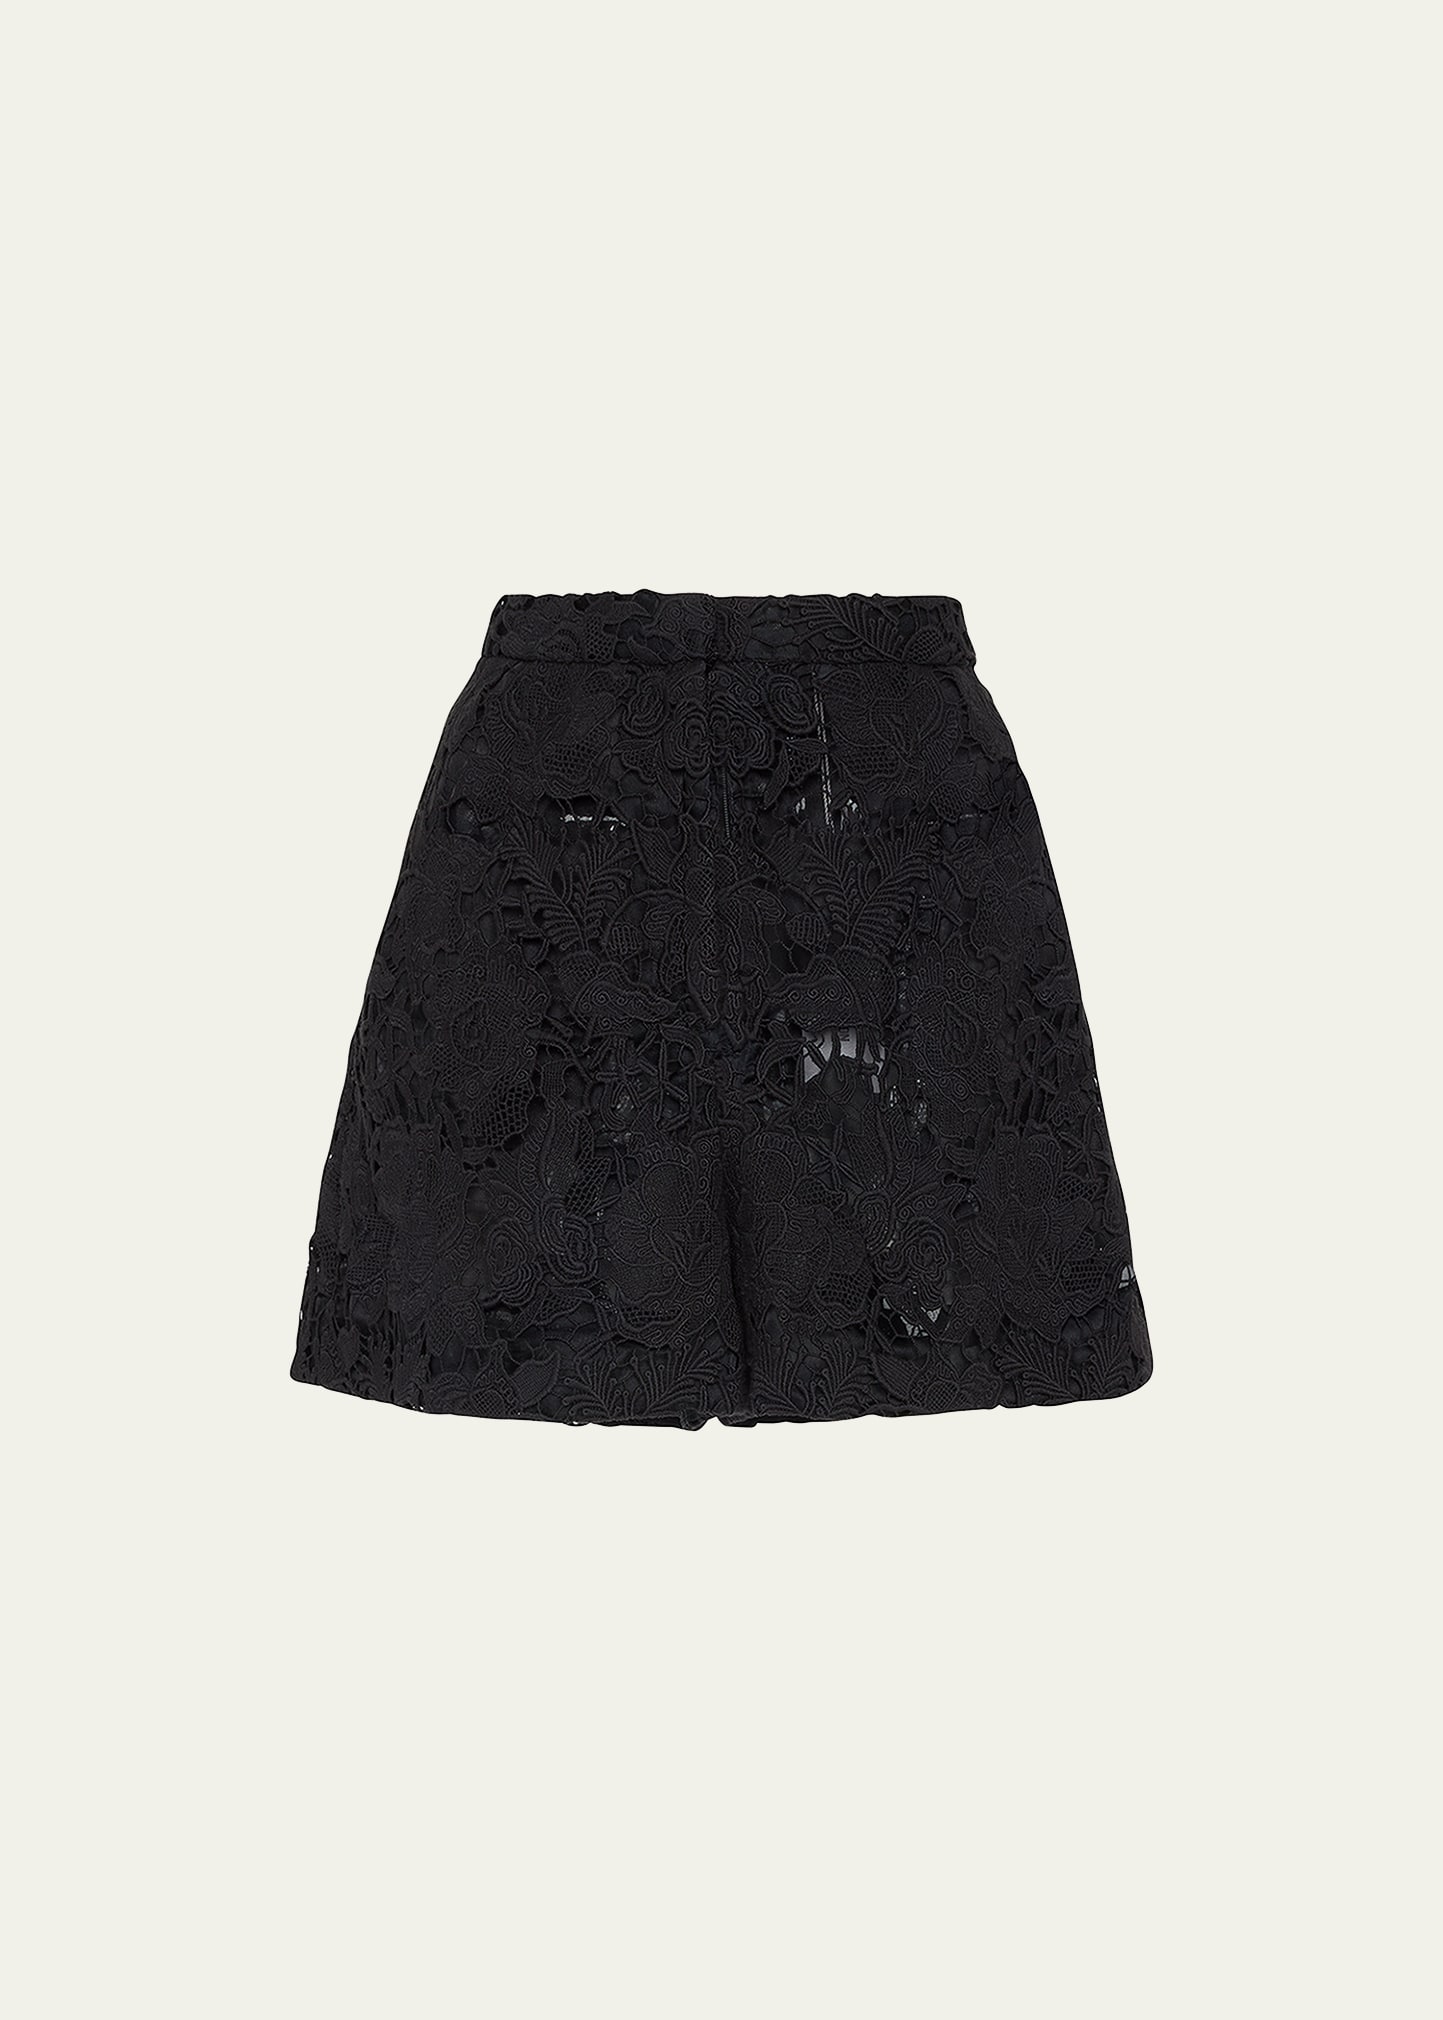 Jason Wu Collection Floral Guipure Lace Shorts